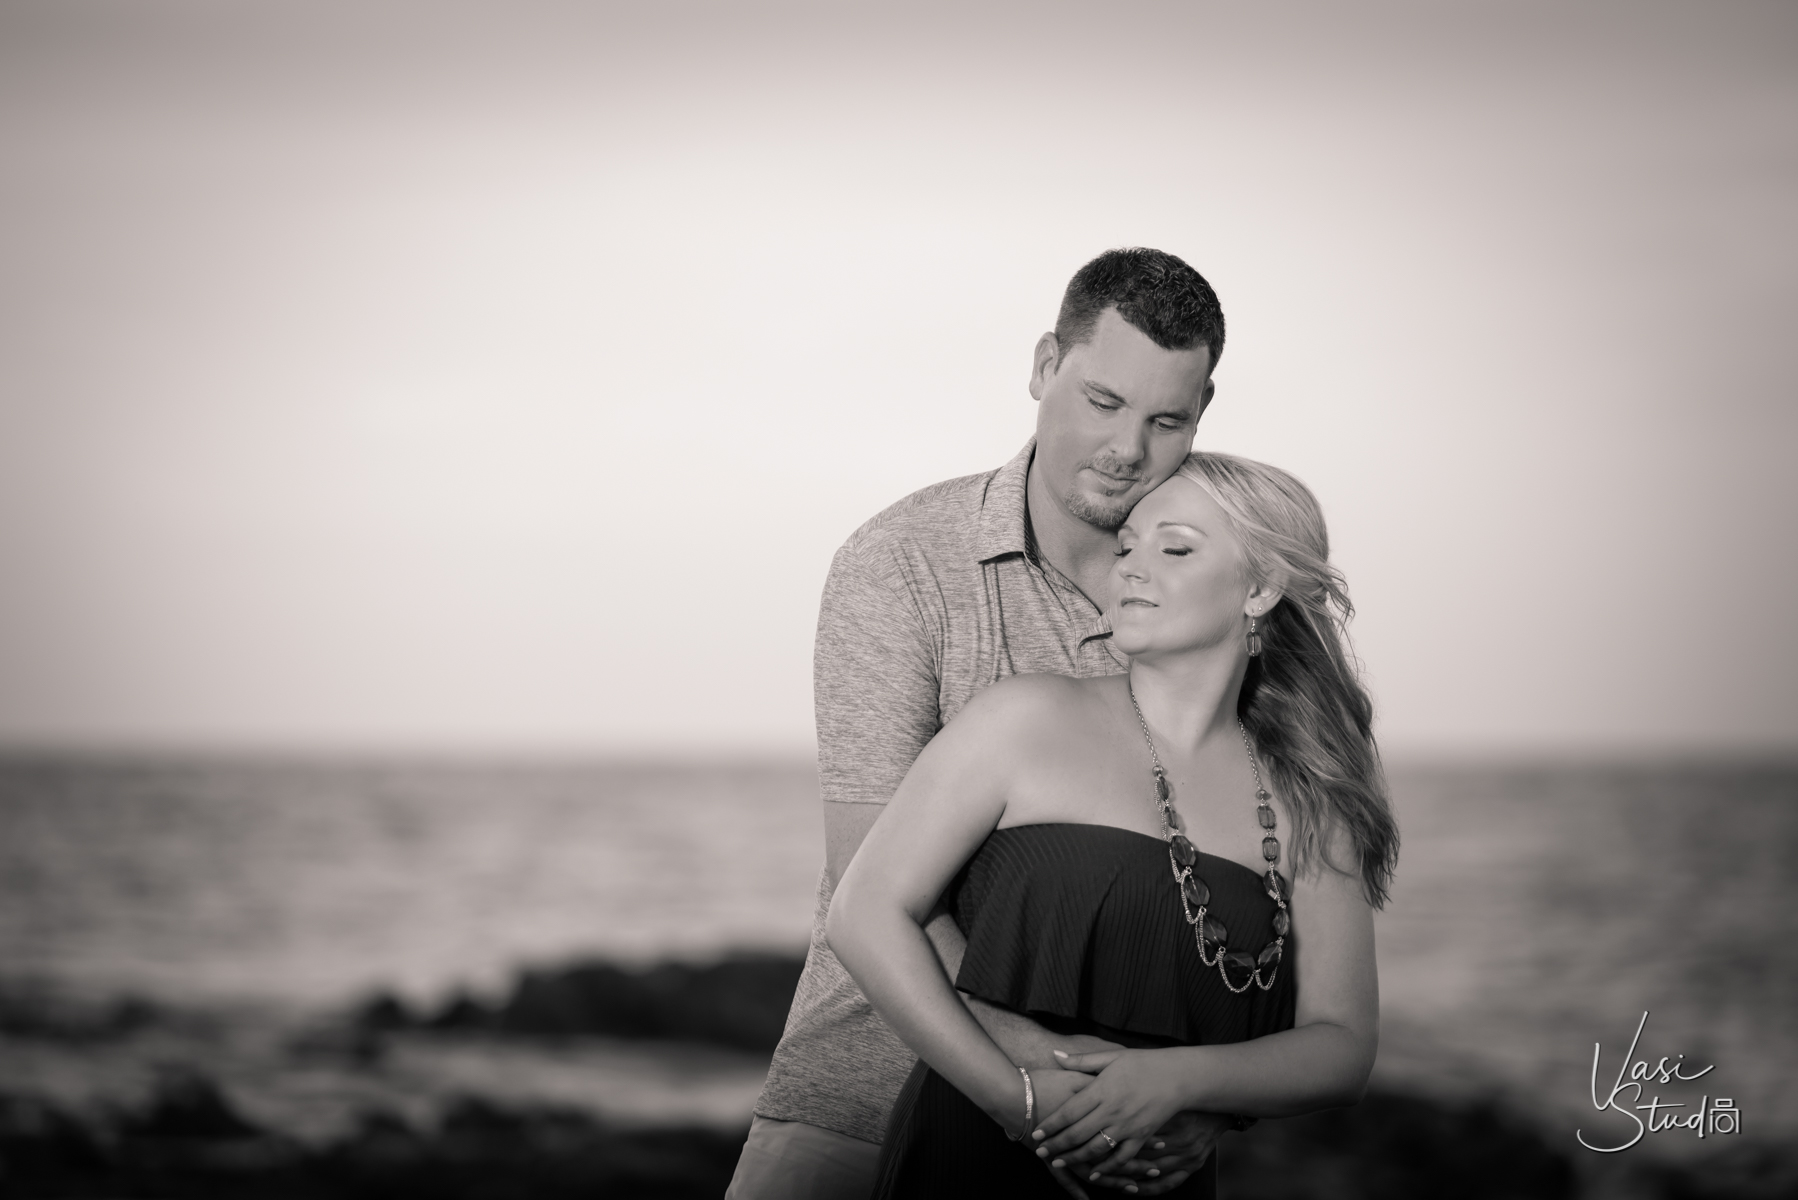 Black and white engagement photos for South Florida couples.